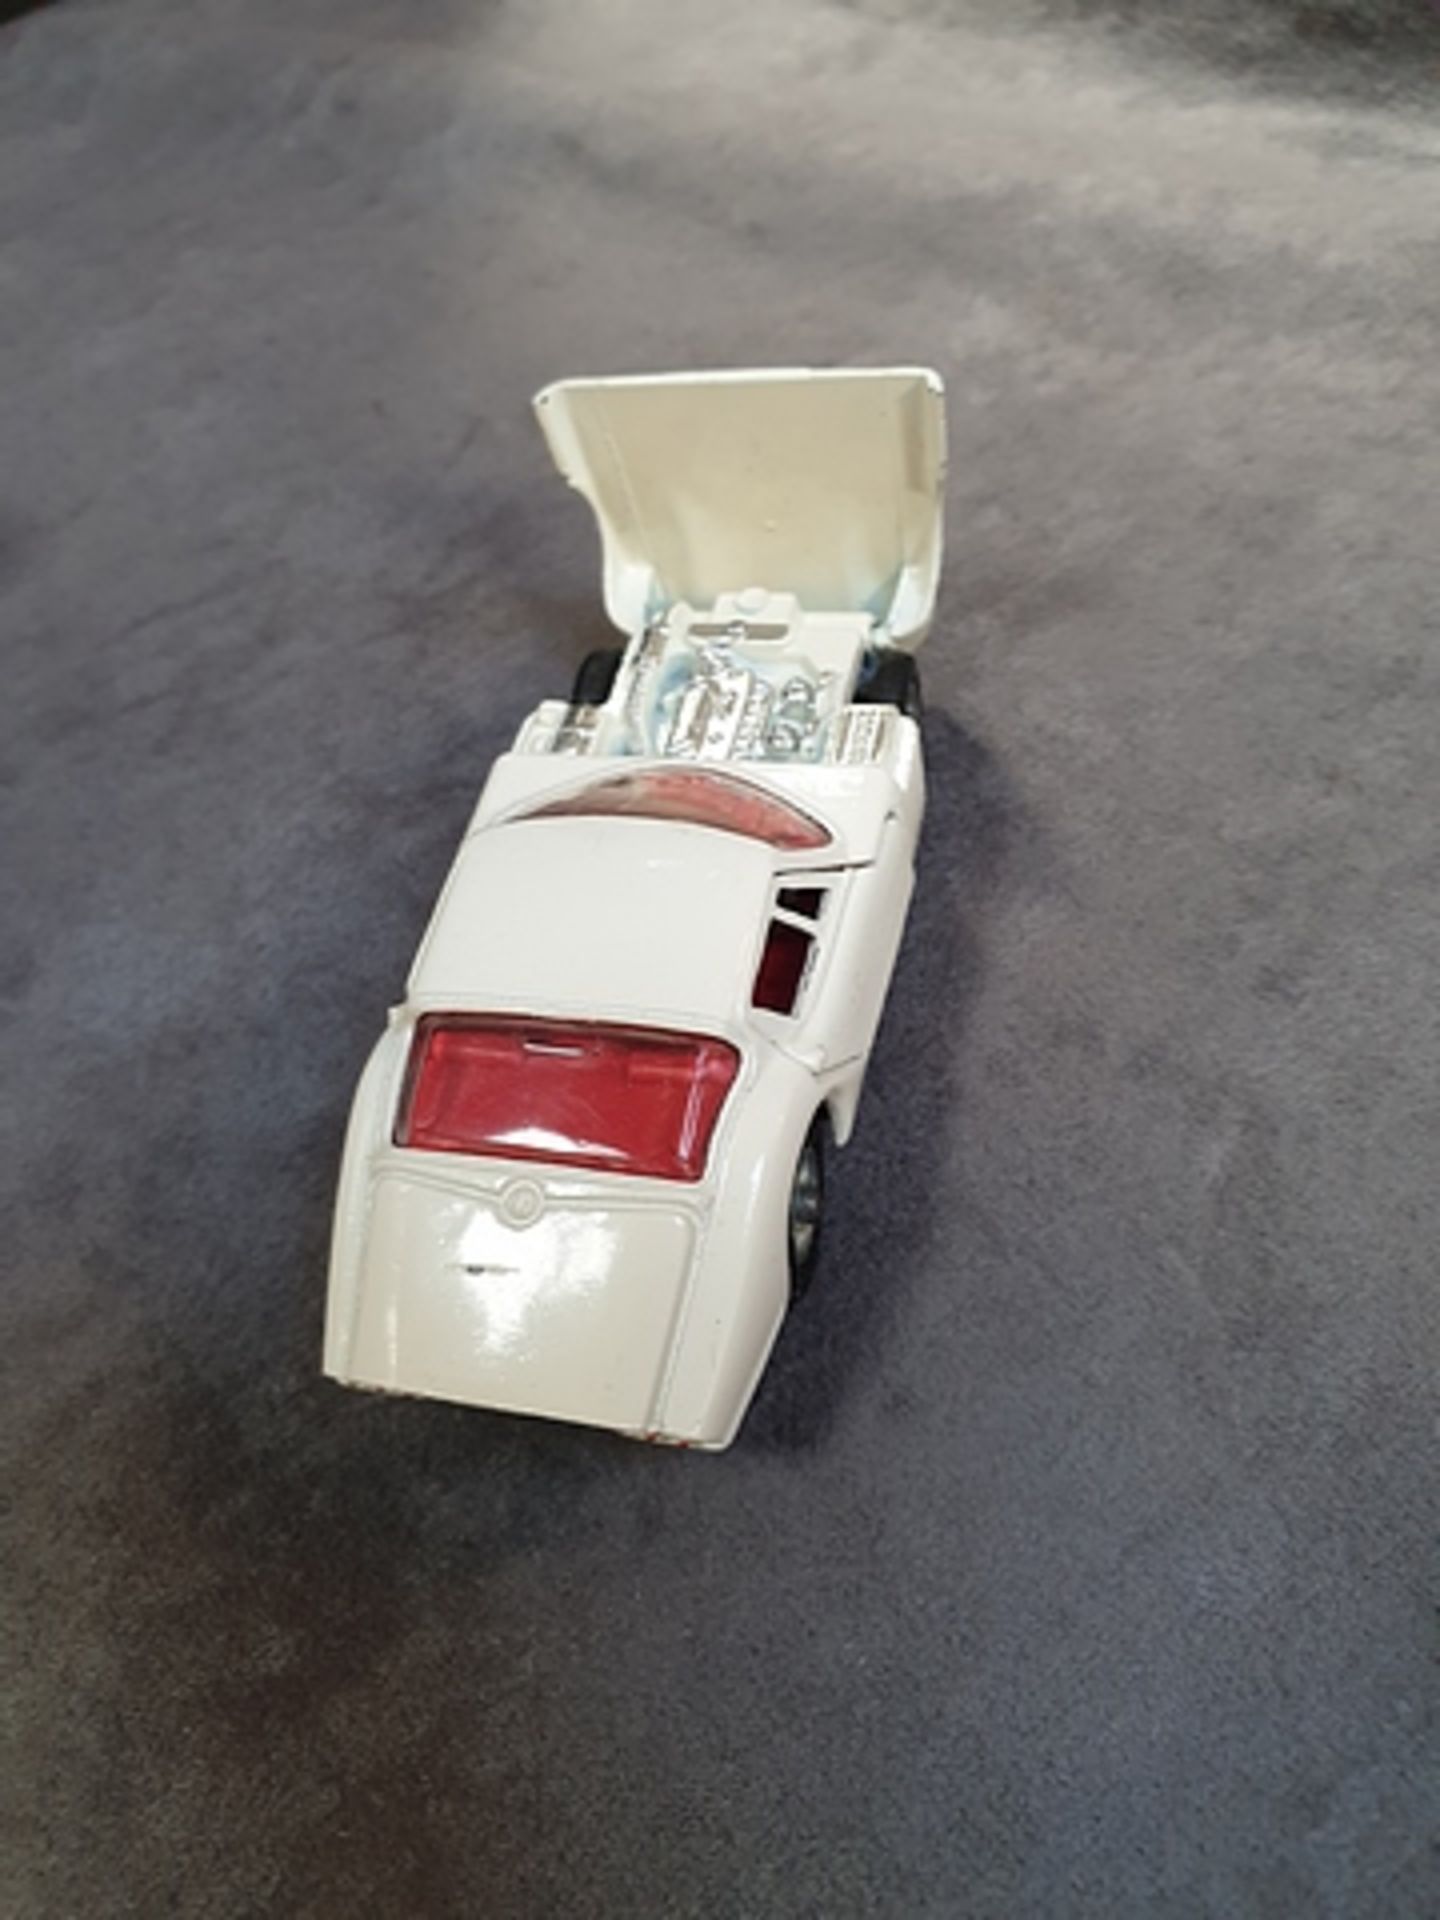 Corgi Toys diecast # 324 Marcos 1800GT with Volvo Engine white with green stripes an red interior - Image 2 of 2